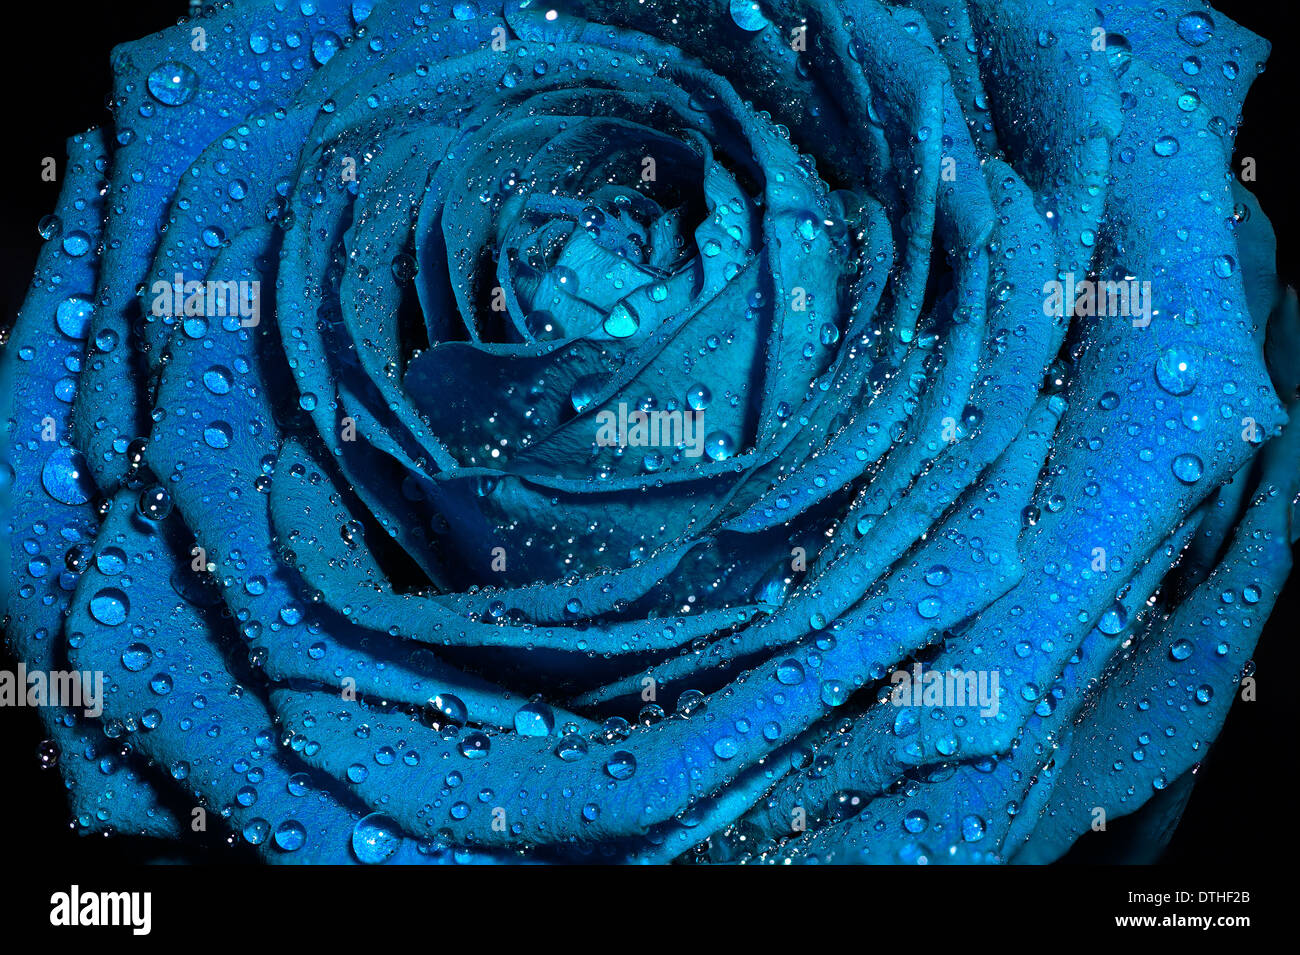 Blue rose with water drops on petals. Stock Photo